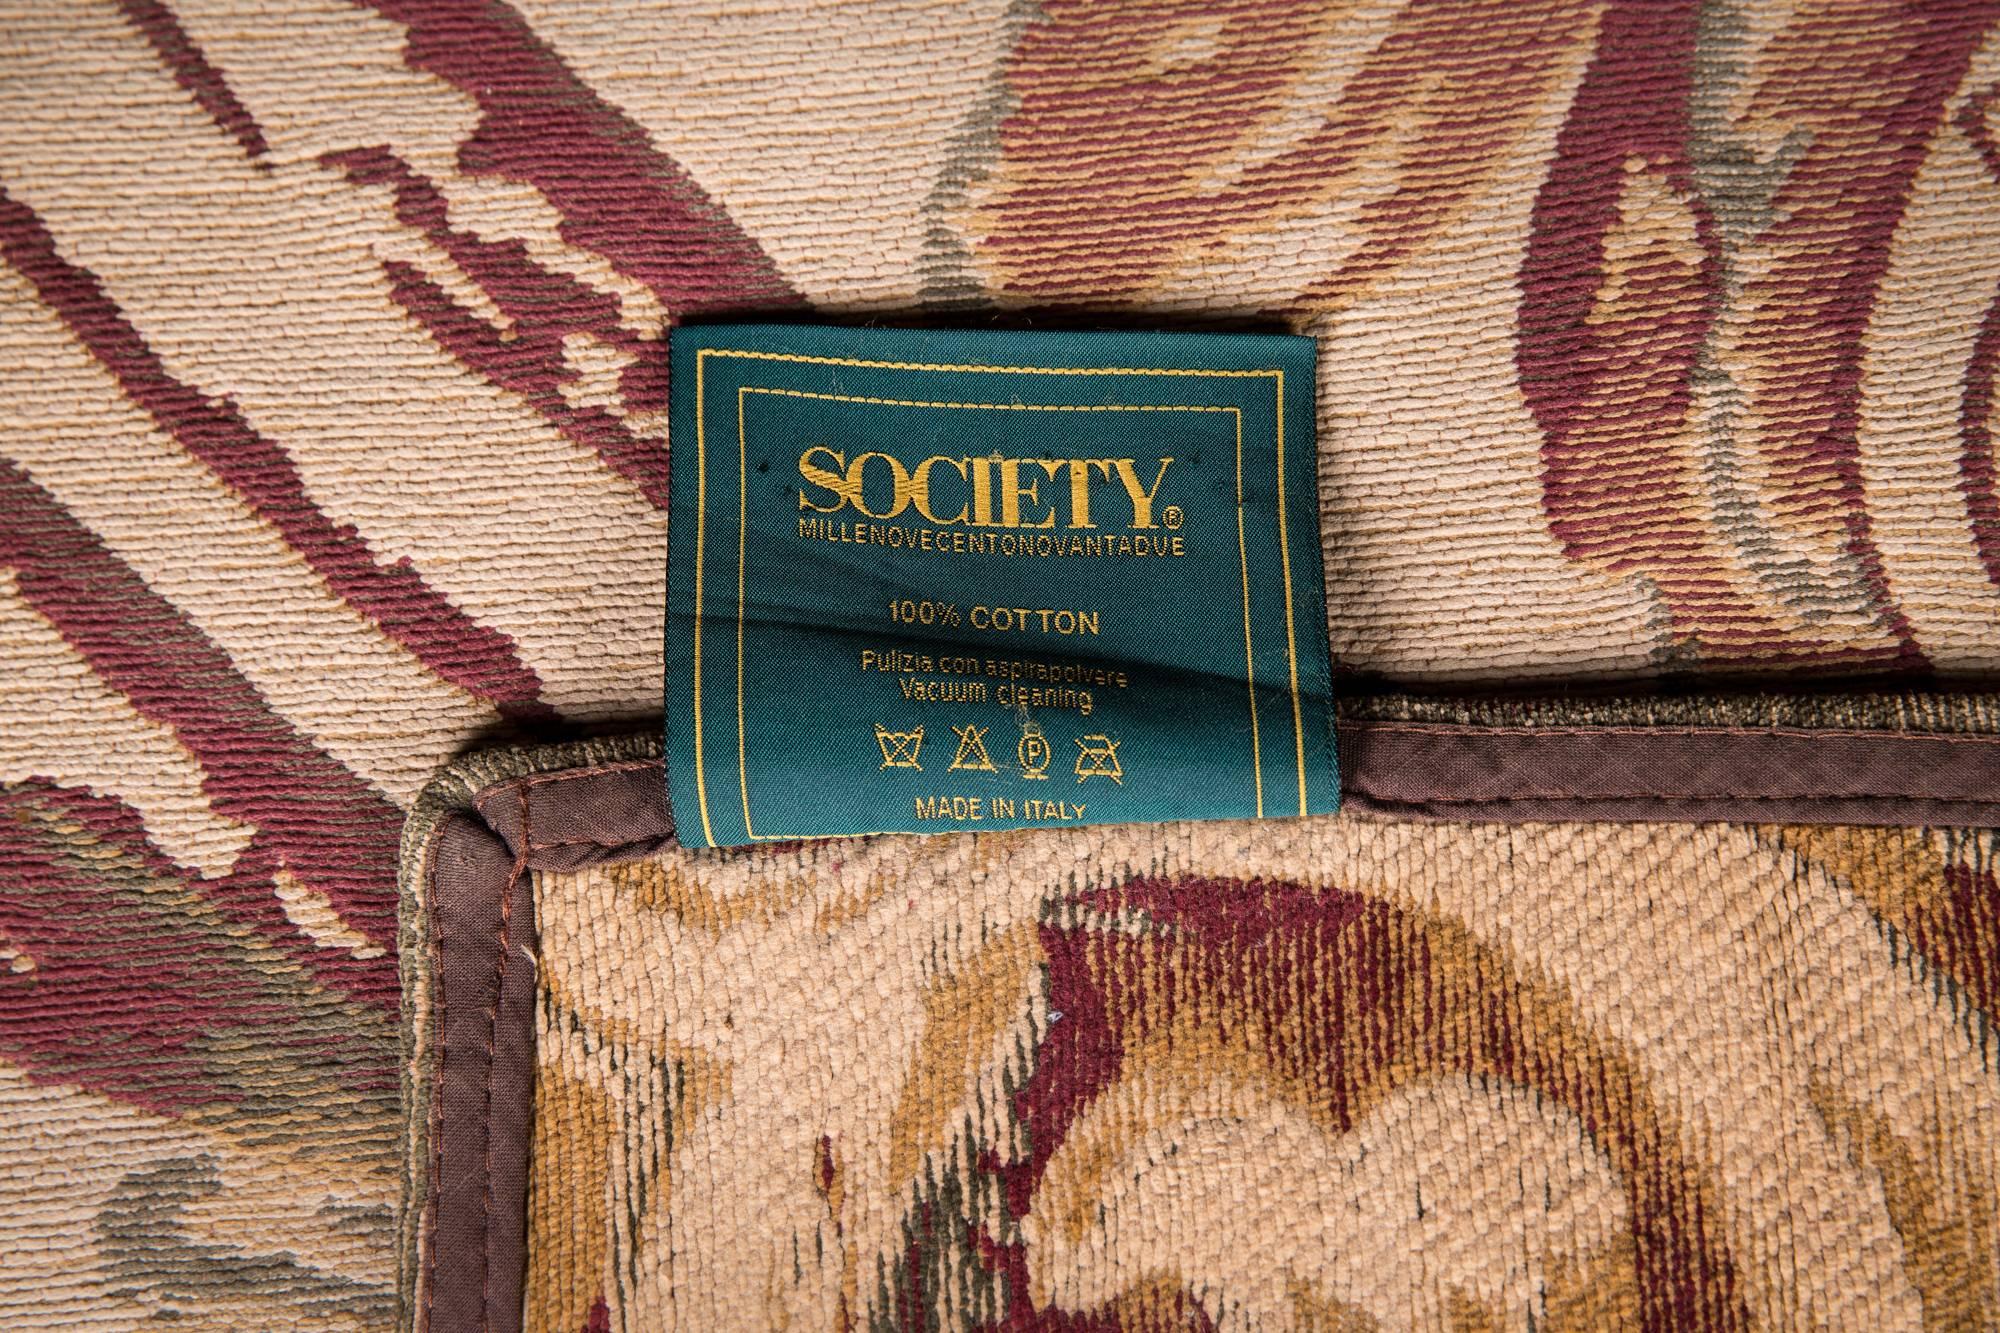 21th Century, Carpet by Society Collezione Tappeti, Made in Italy 1